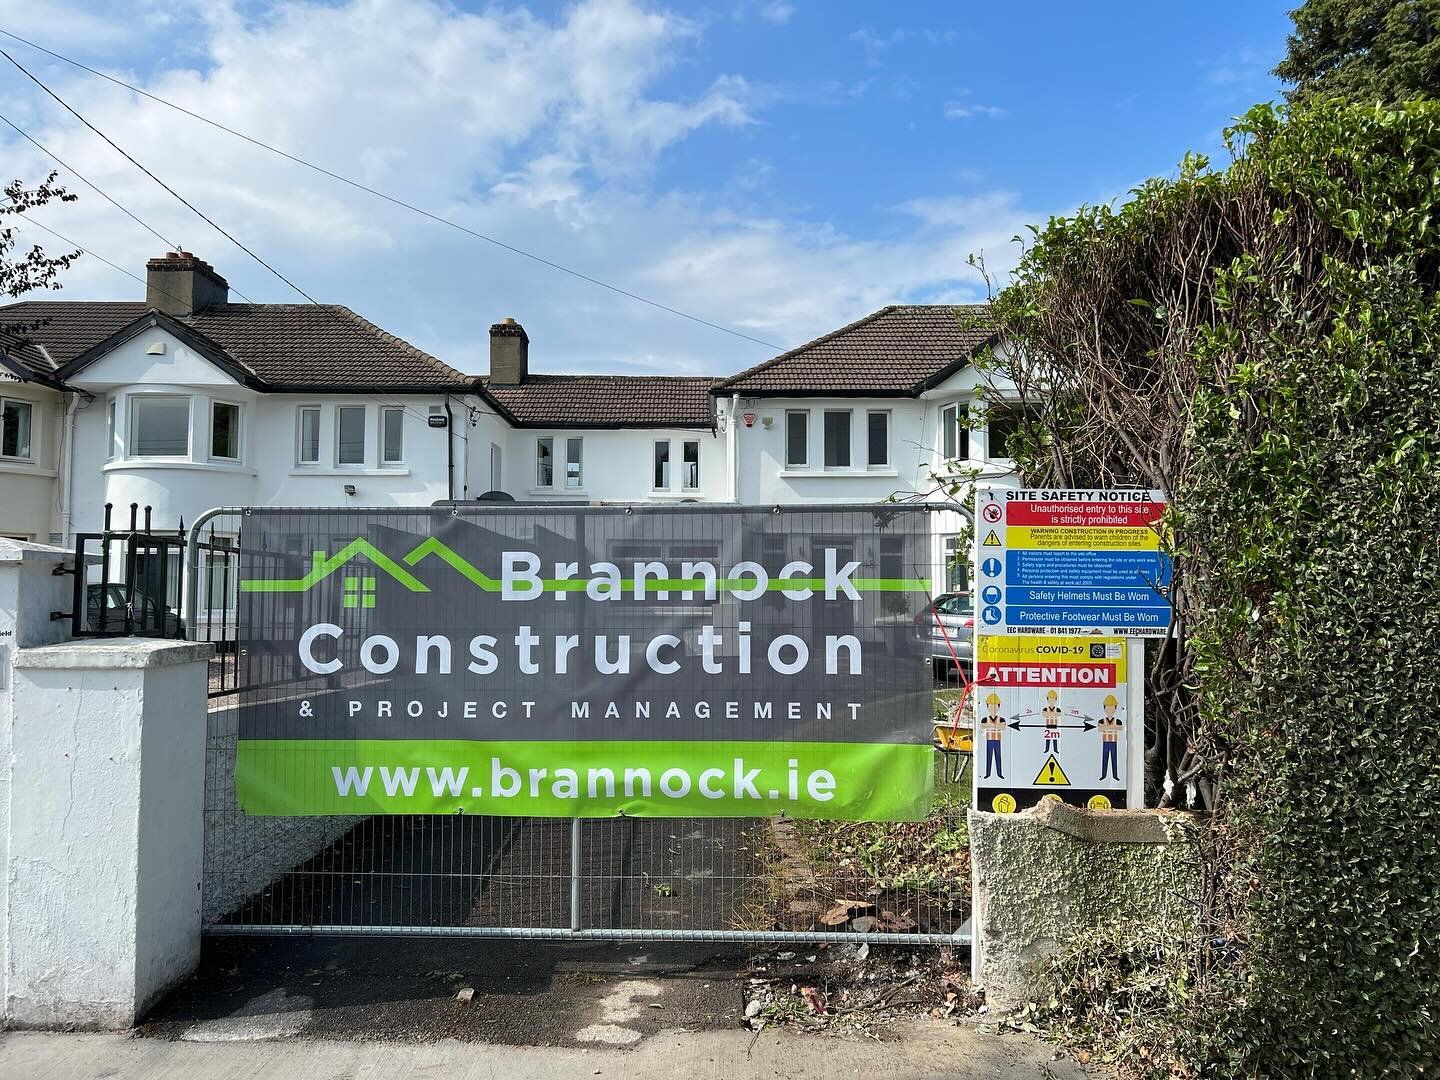 Beginning of an extension and full renovation in Blackrock. 

This project involved building an extension to add extra space for the clients while also reconfiguring upstairs area to enhance existing space. 

We began by reconfiguring upstairs area t